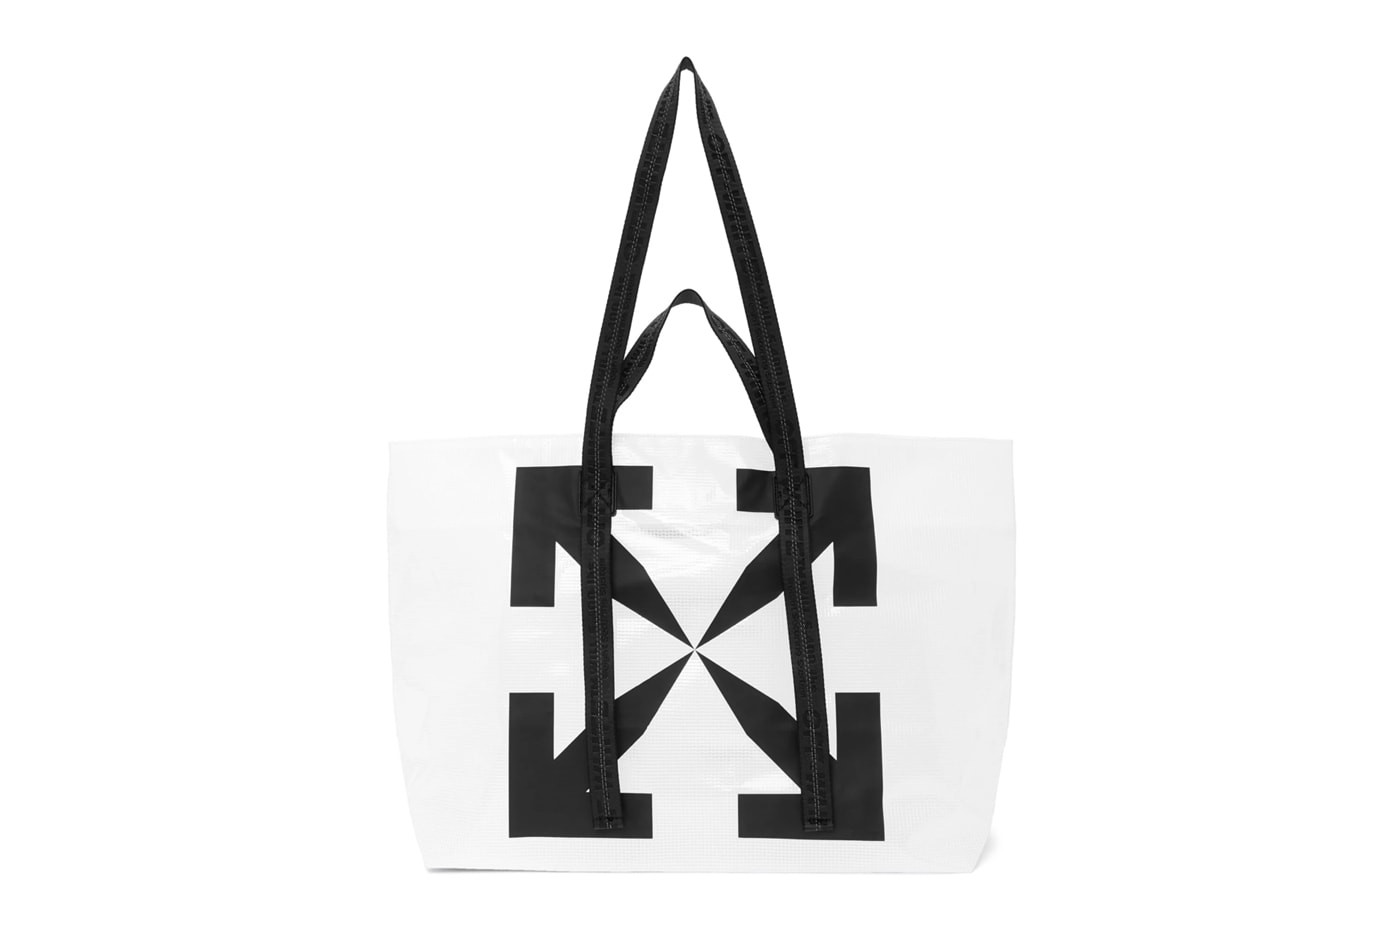 Off-white bags for Women